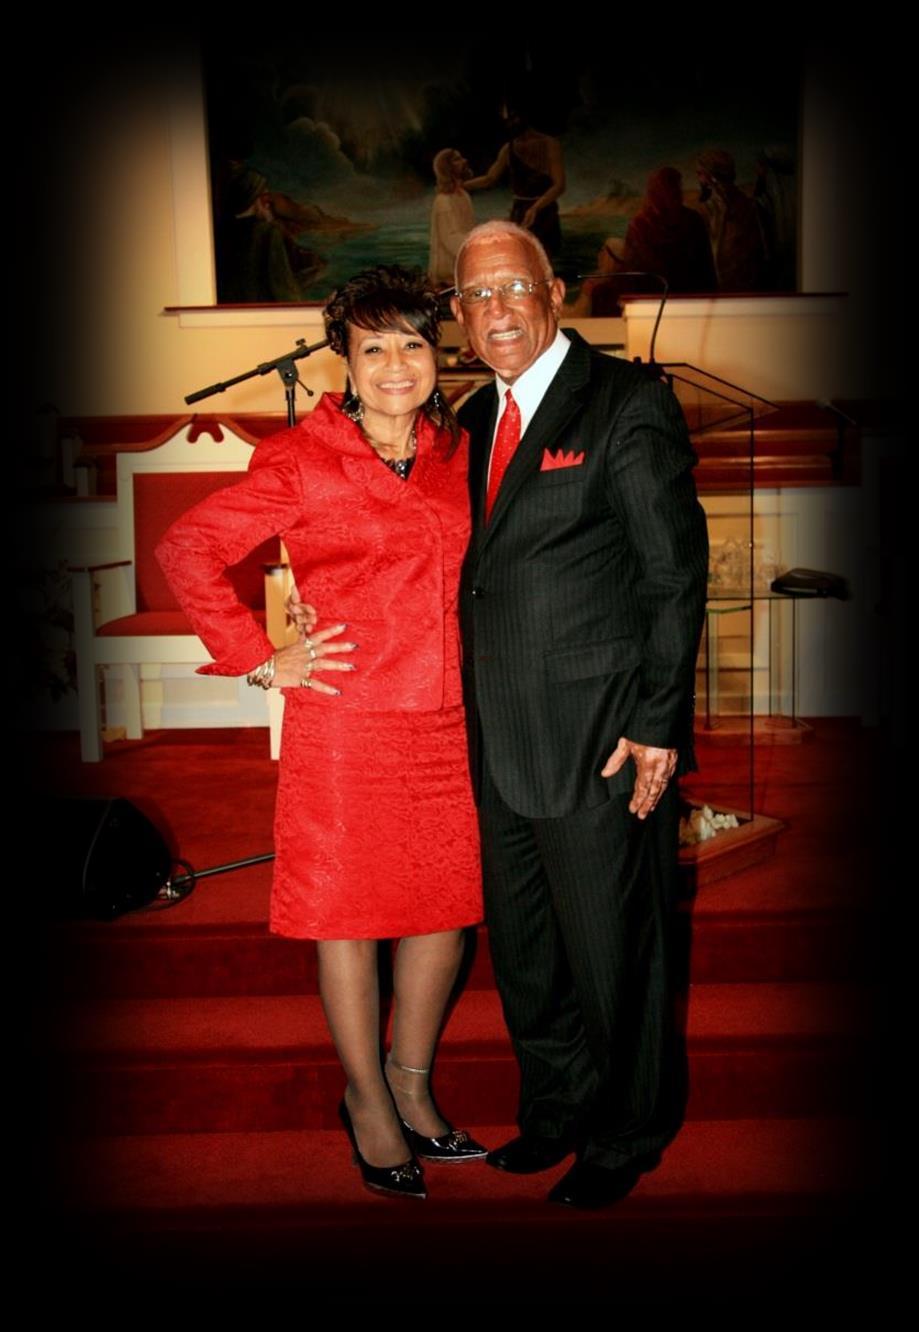 As we celebrate the 150 th Anniversary of our beloved Second Mount Zion Baptist Church, we are inclined to express how honored we are to be appointed by God to serve as Pastor and First Lady of such